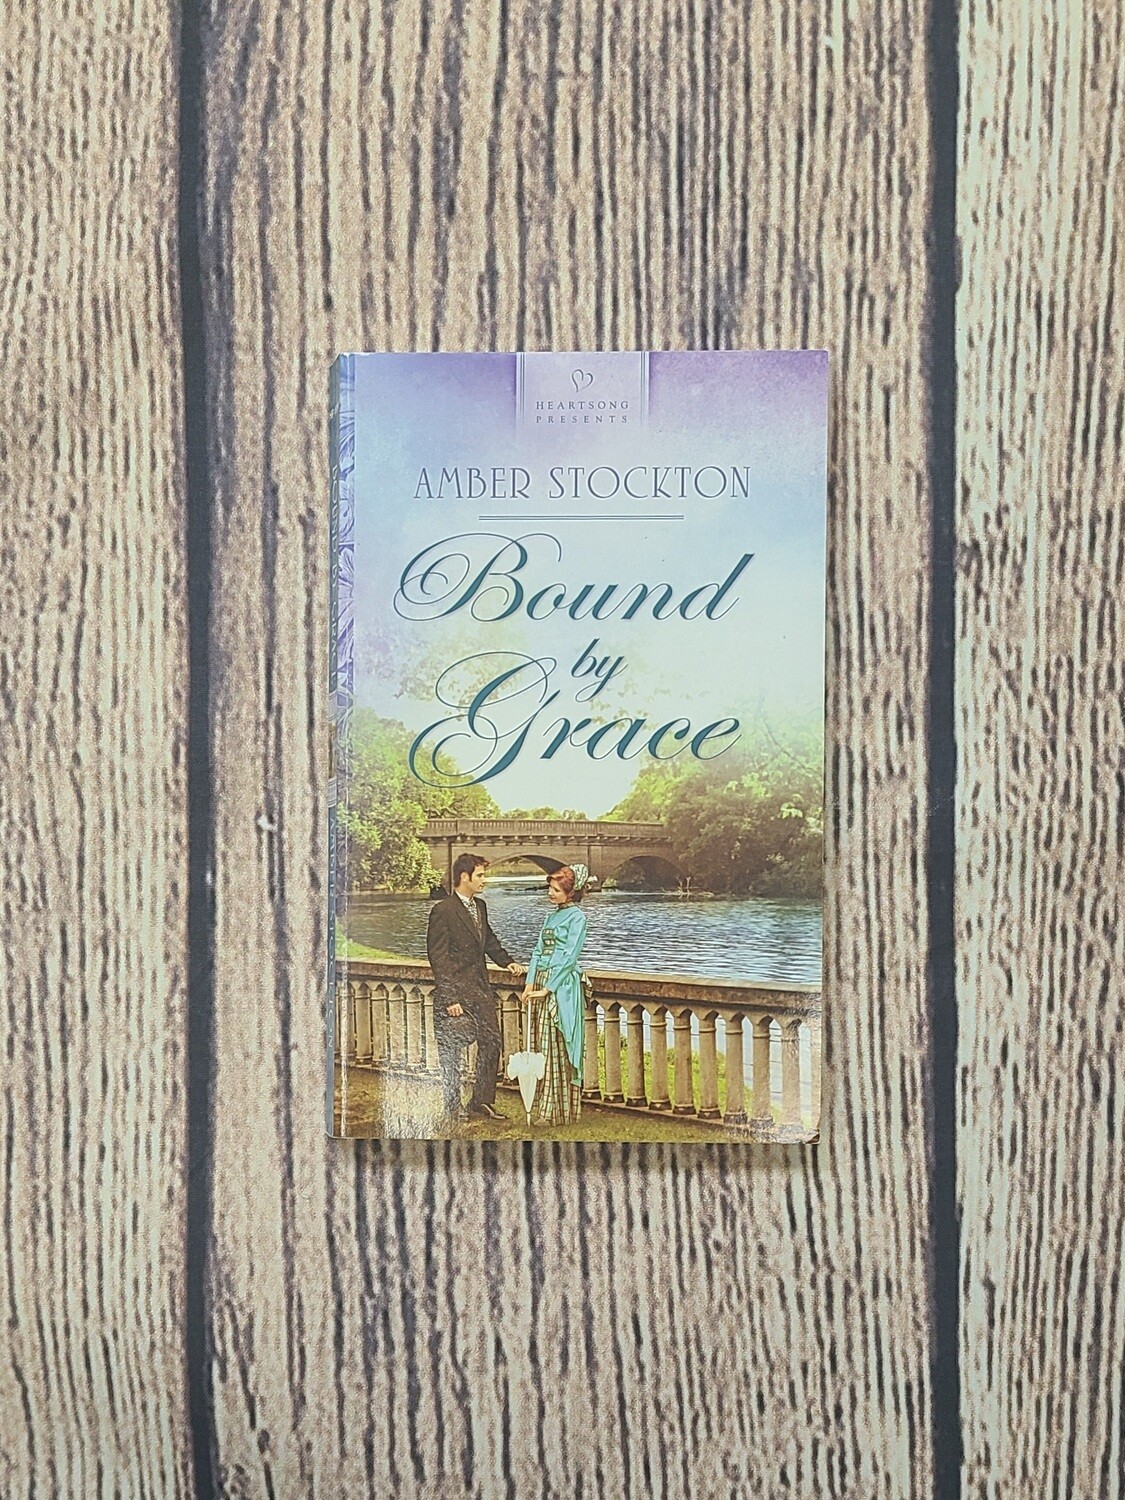 Bound by Grace by Amber Stockton